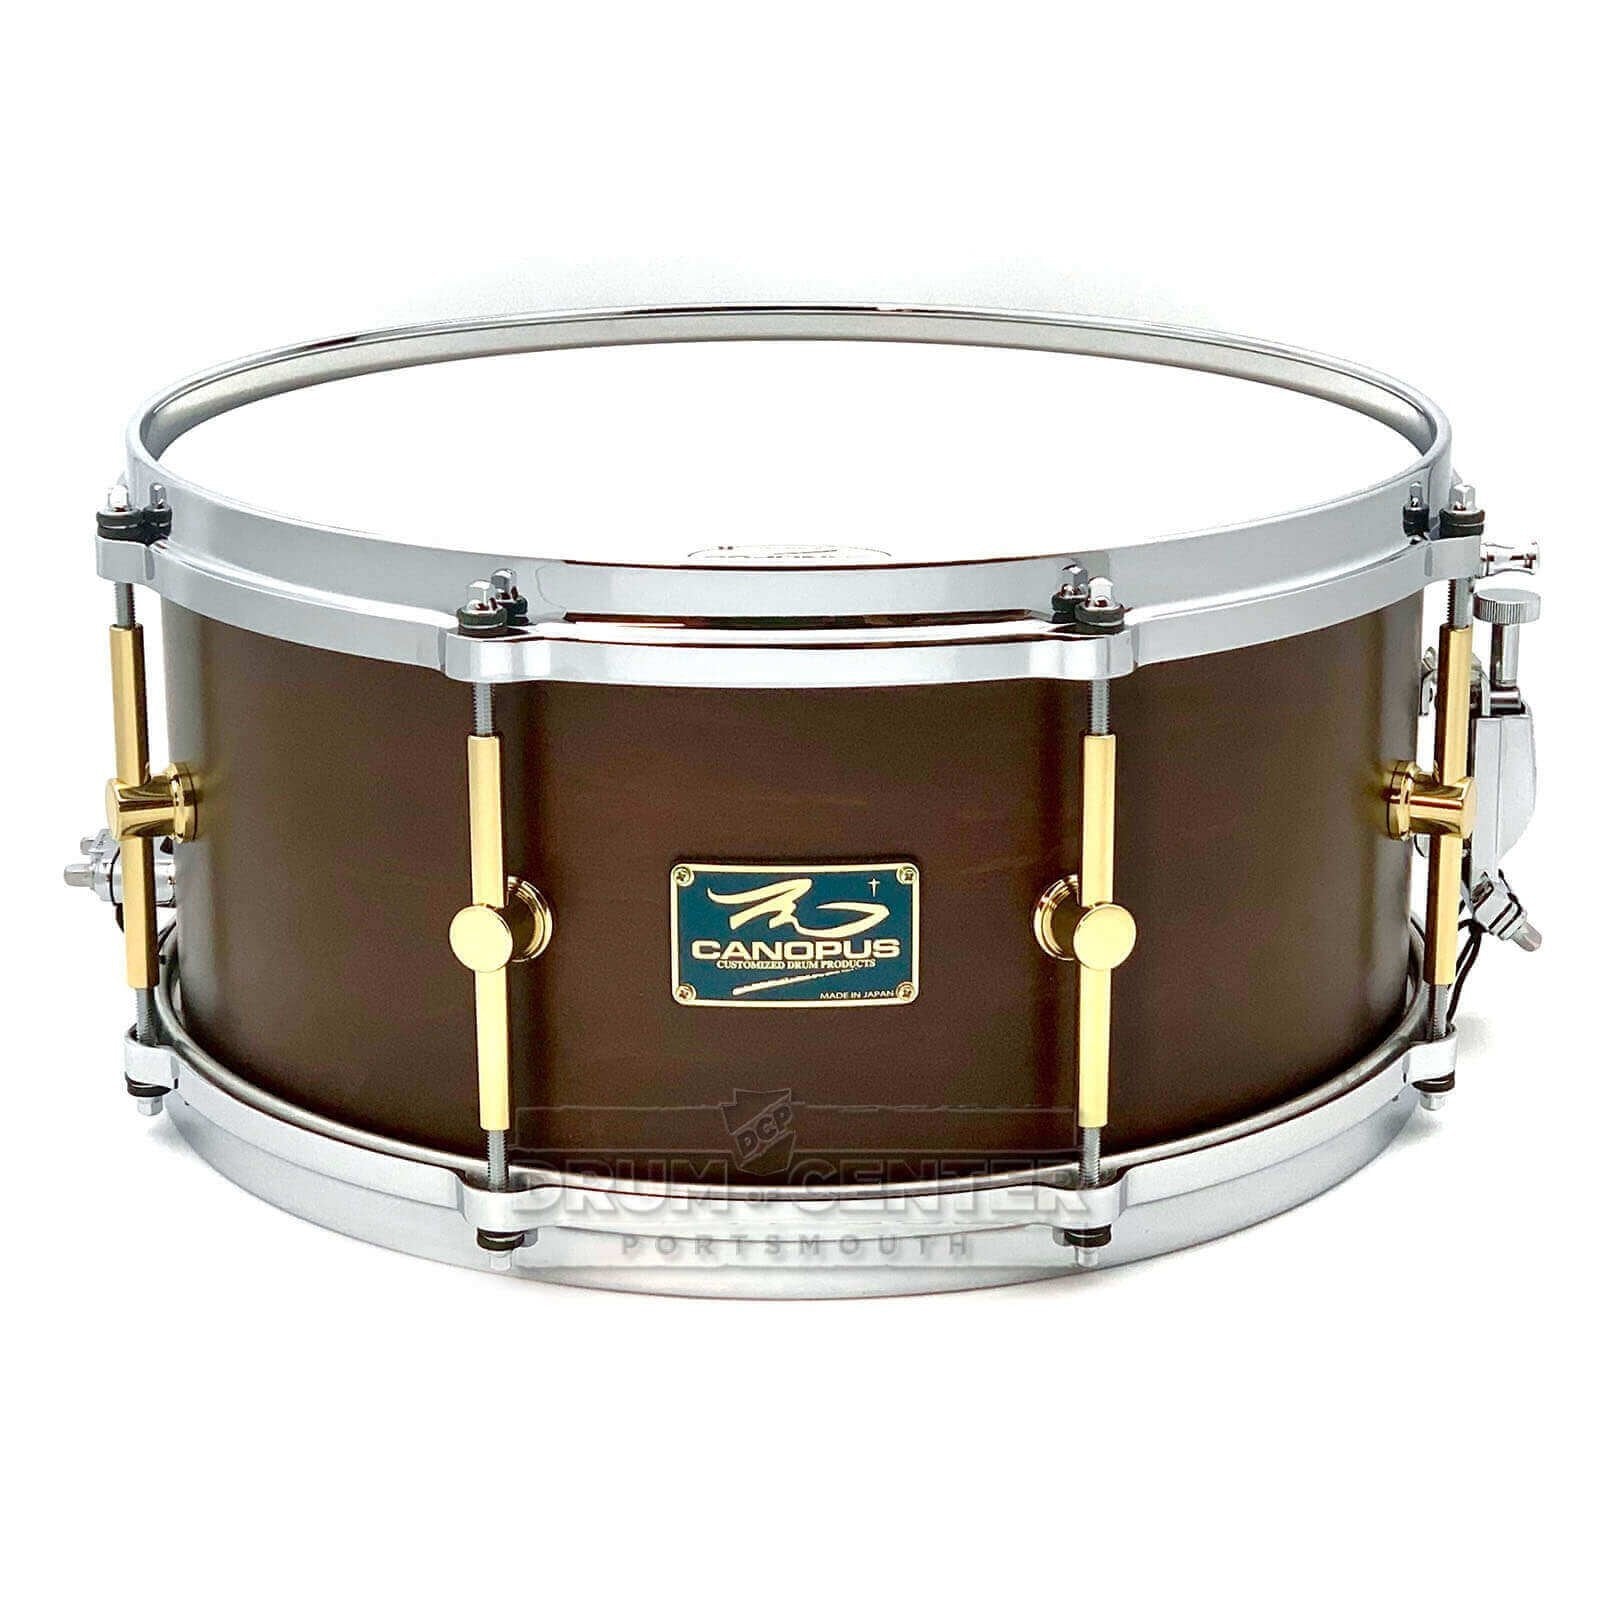 Canopus 'The Maple' 10ply Snare Drum 14x6.5 Bitter Brown Oil w